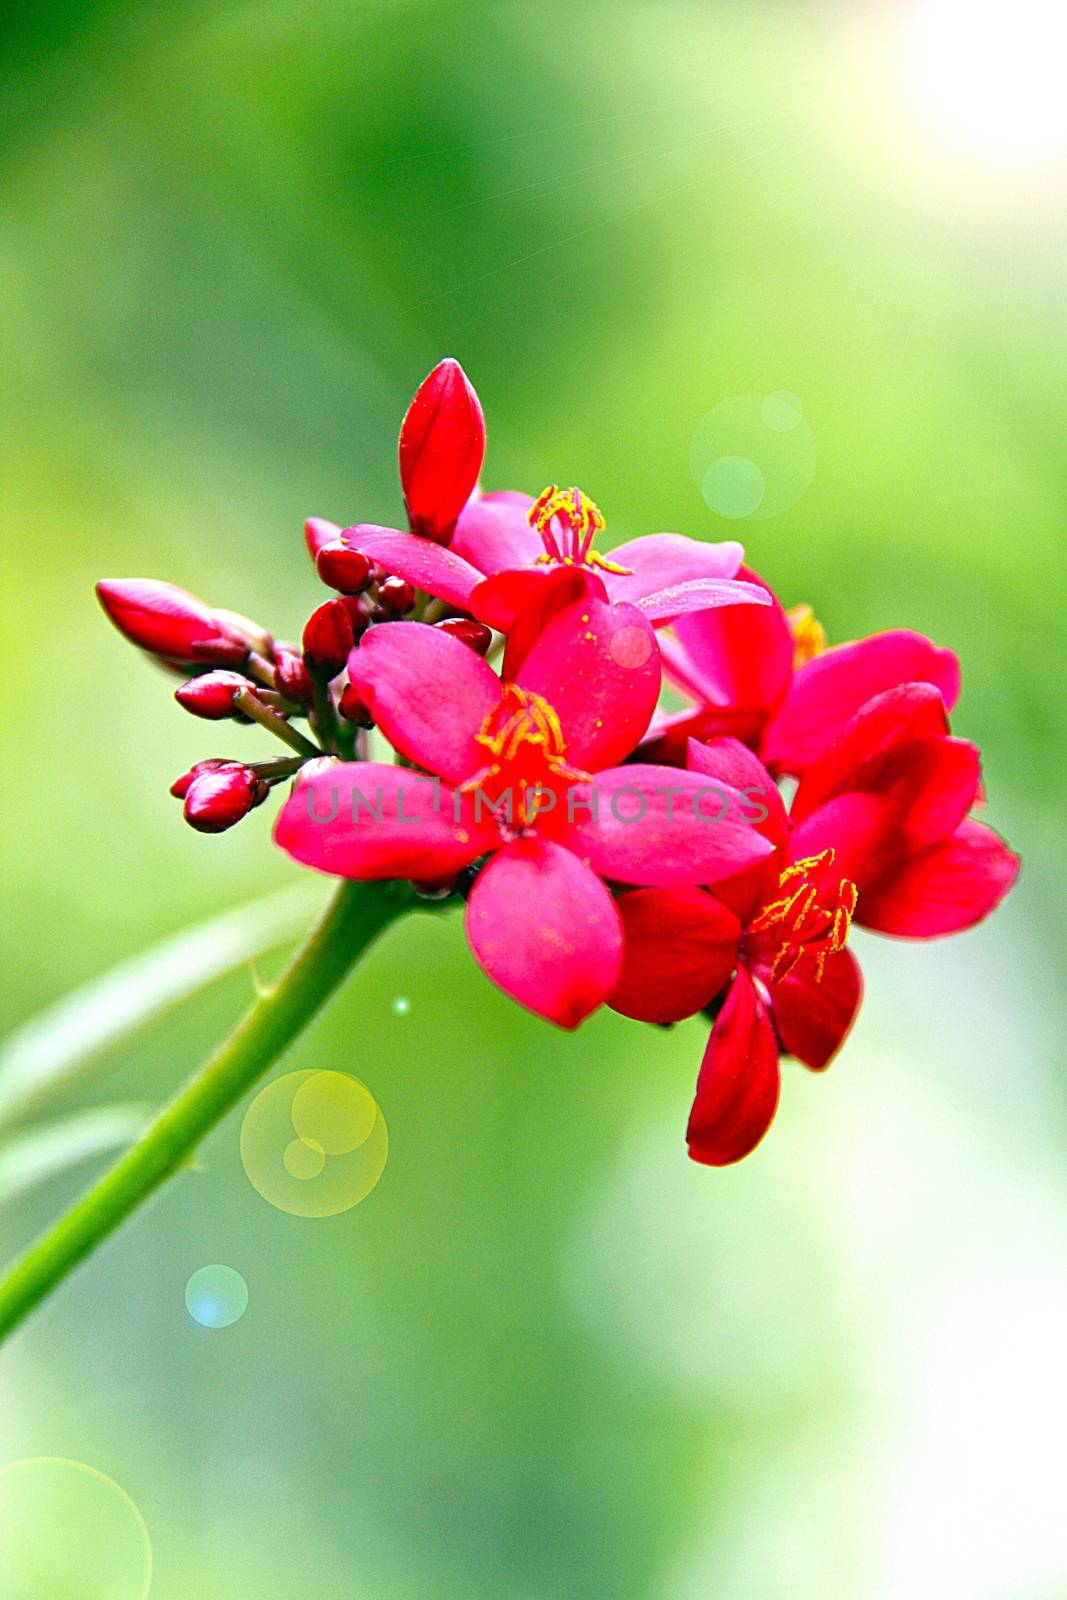 Red flower in the garden with lens flare effect, selective focus and soft focus